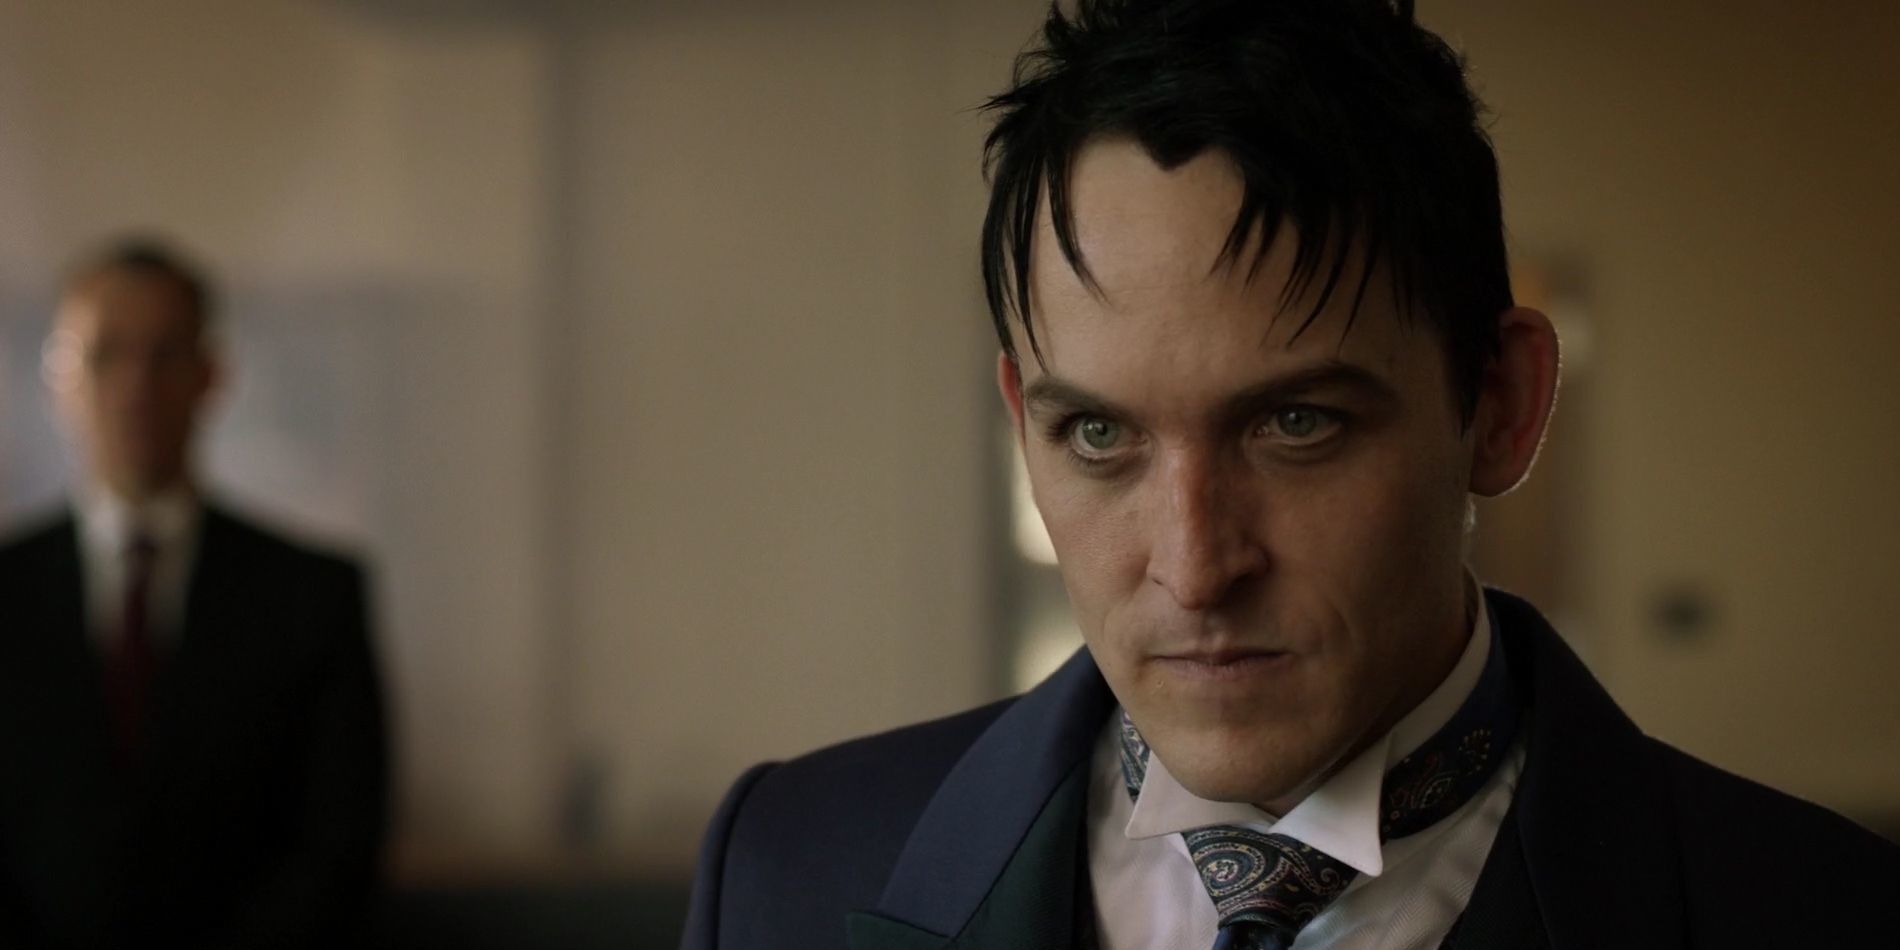 25 Things Only True Batman Fans Know About Gotham